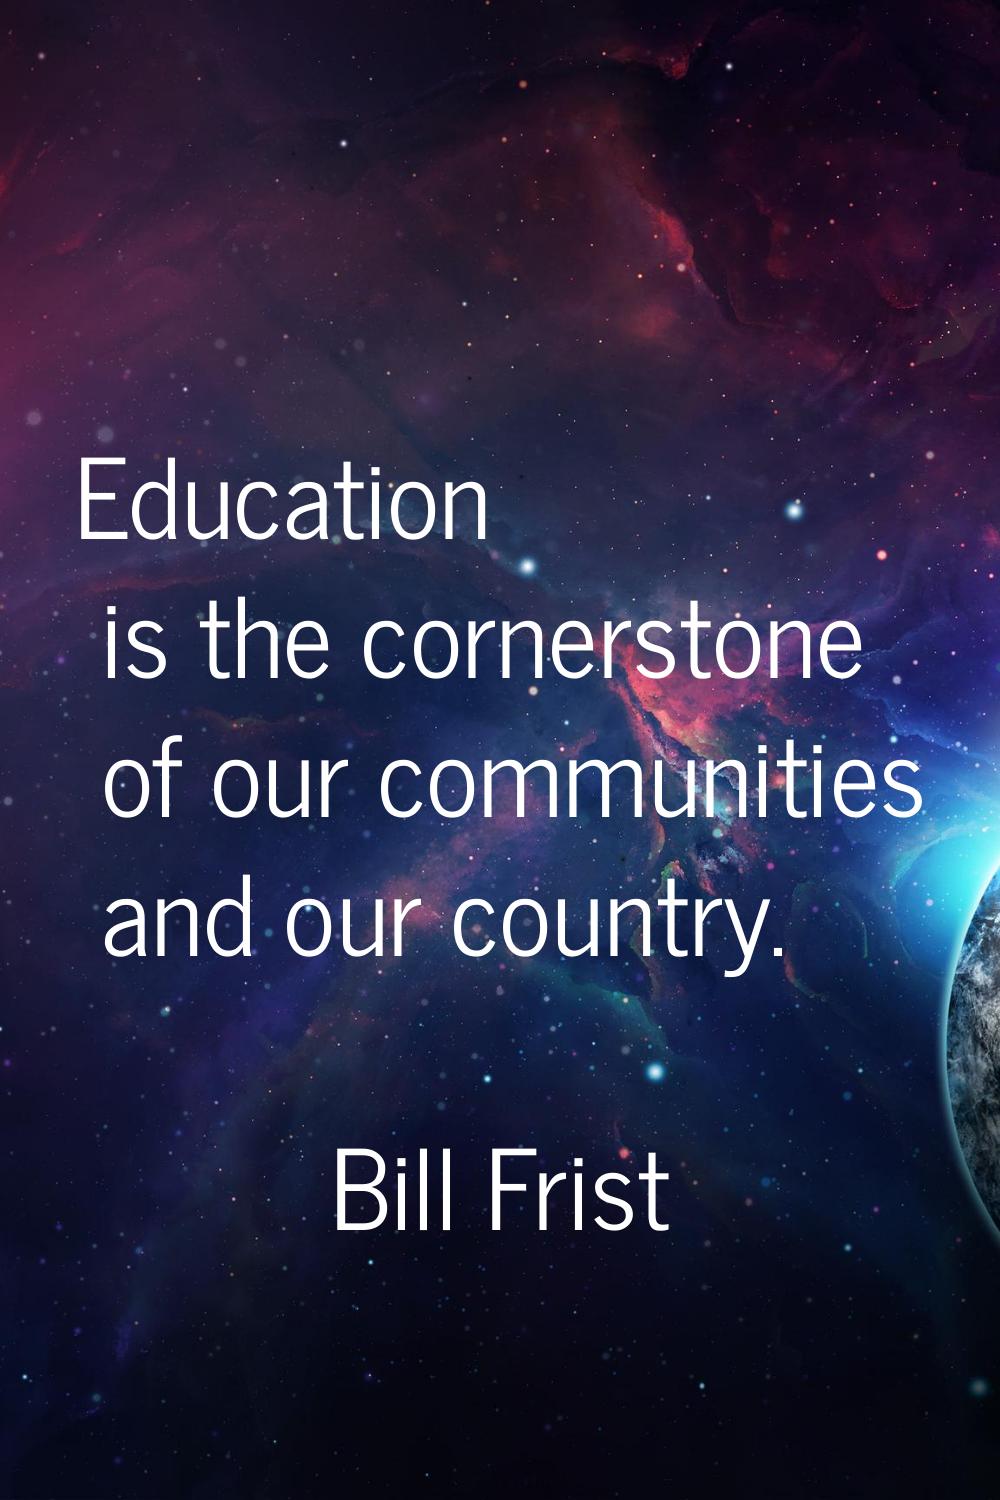 Education is the cornerstone of our communities and our country.